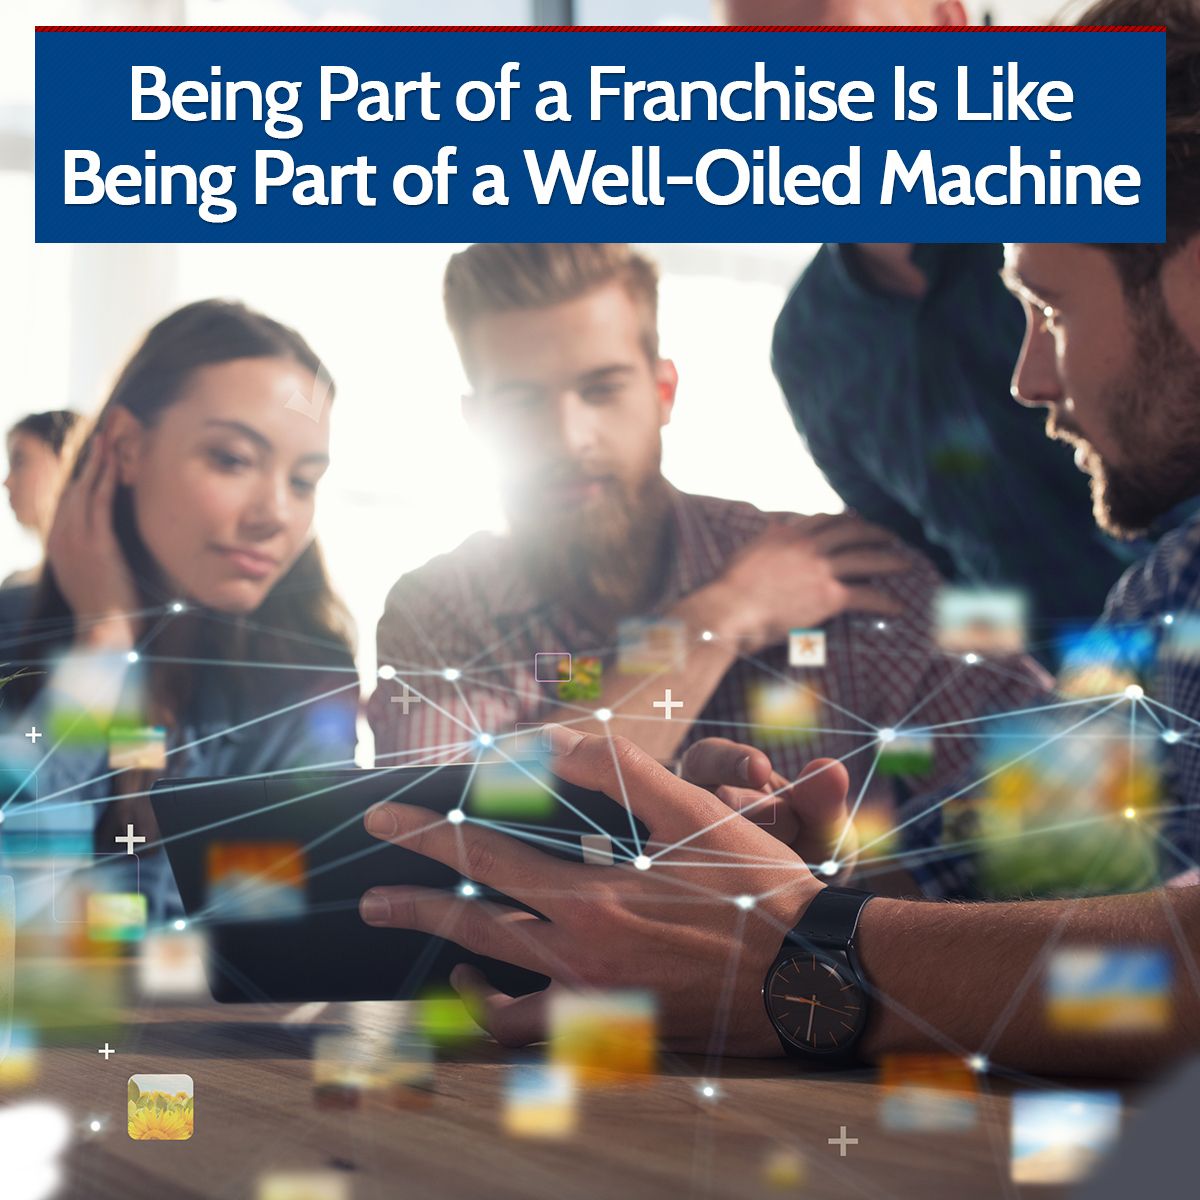 Being Part of a Franchise Is Like Being Part of a Well-Oiled Machine